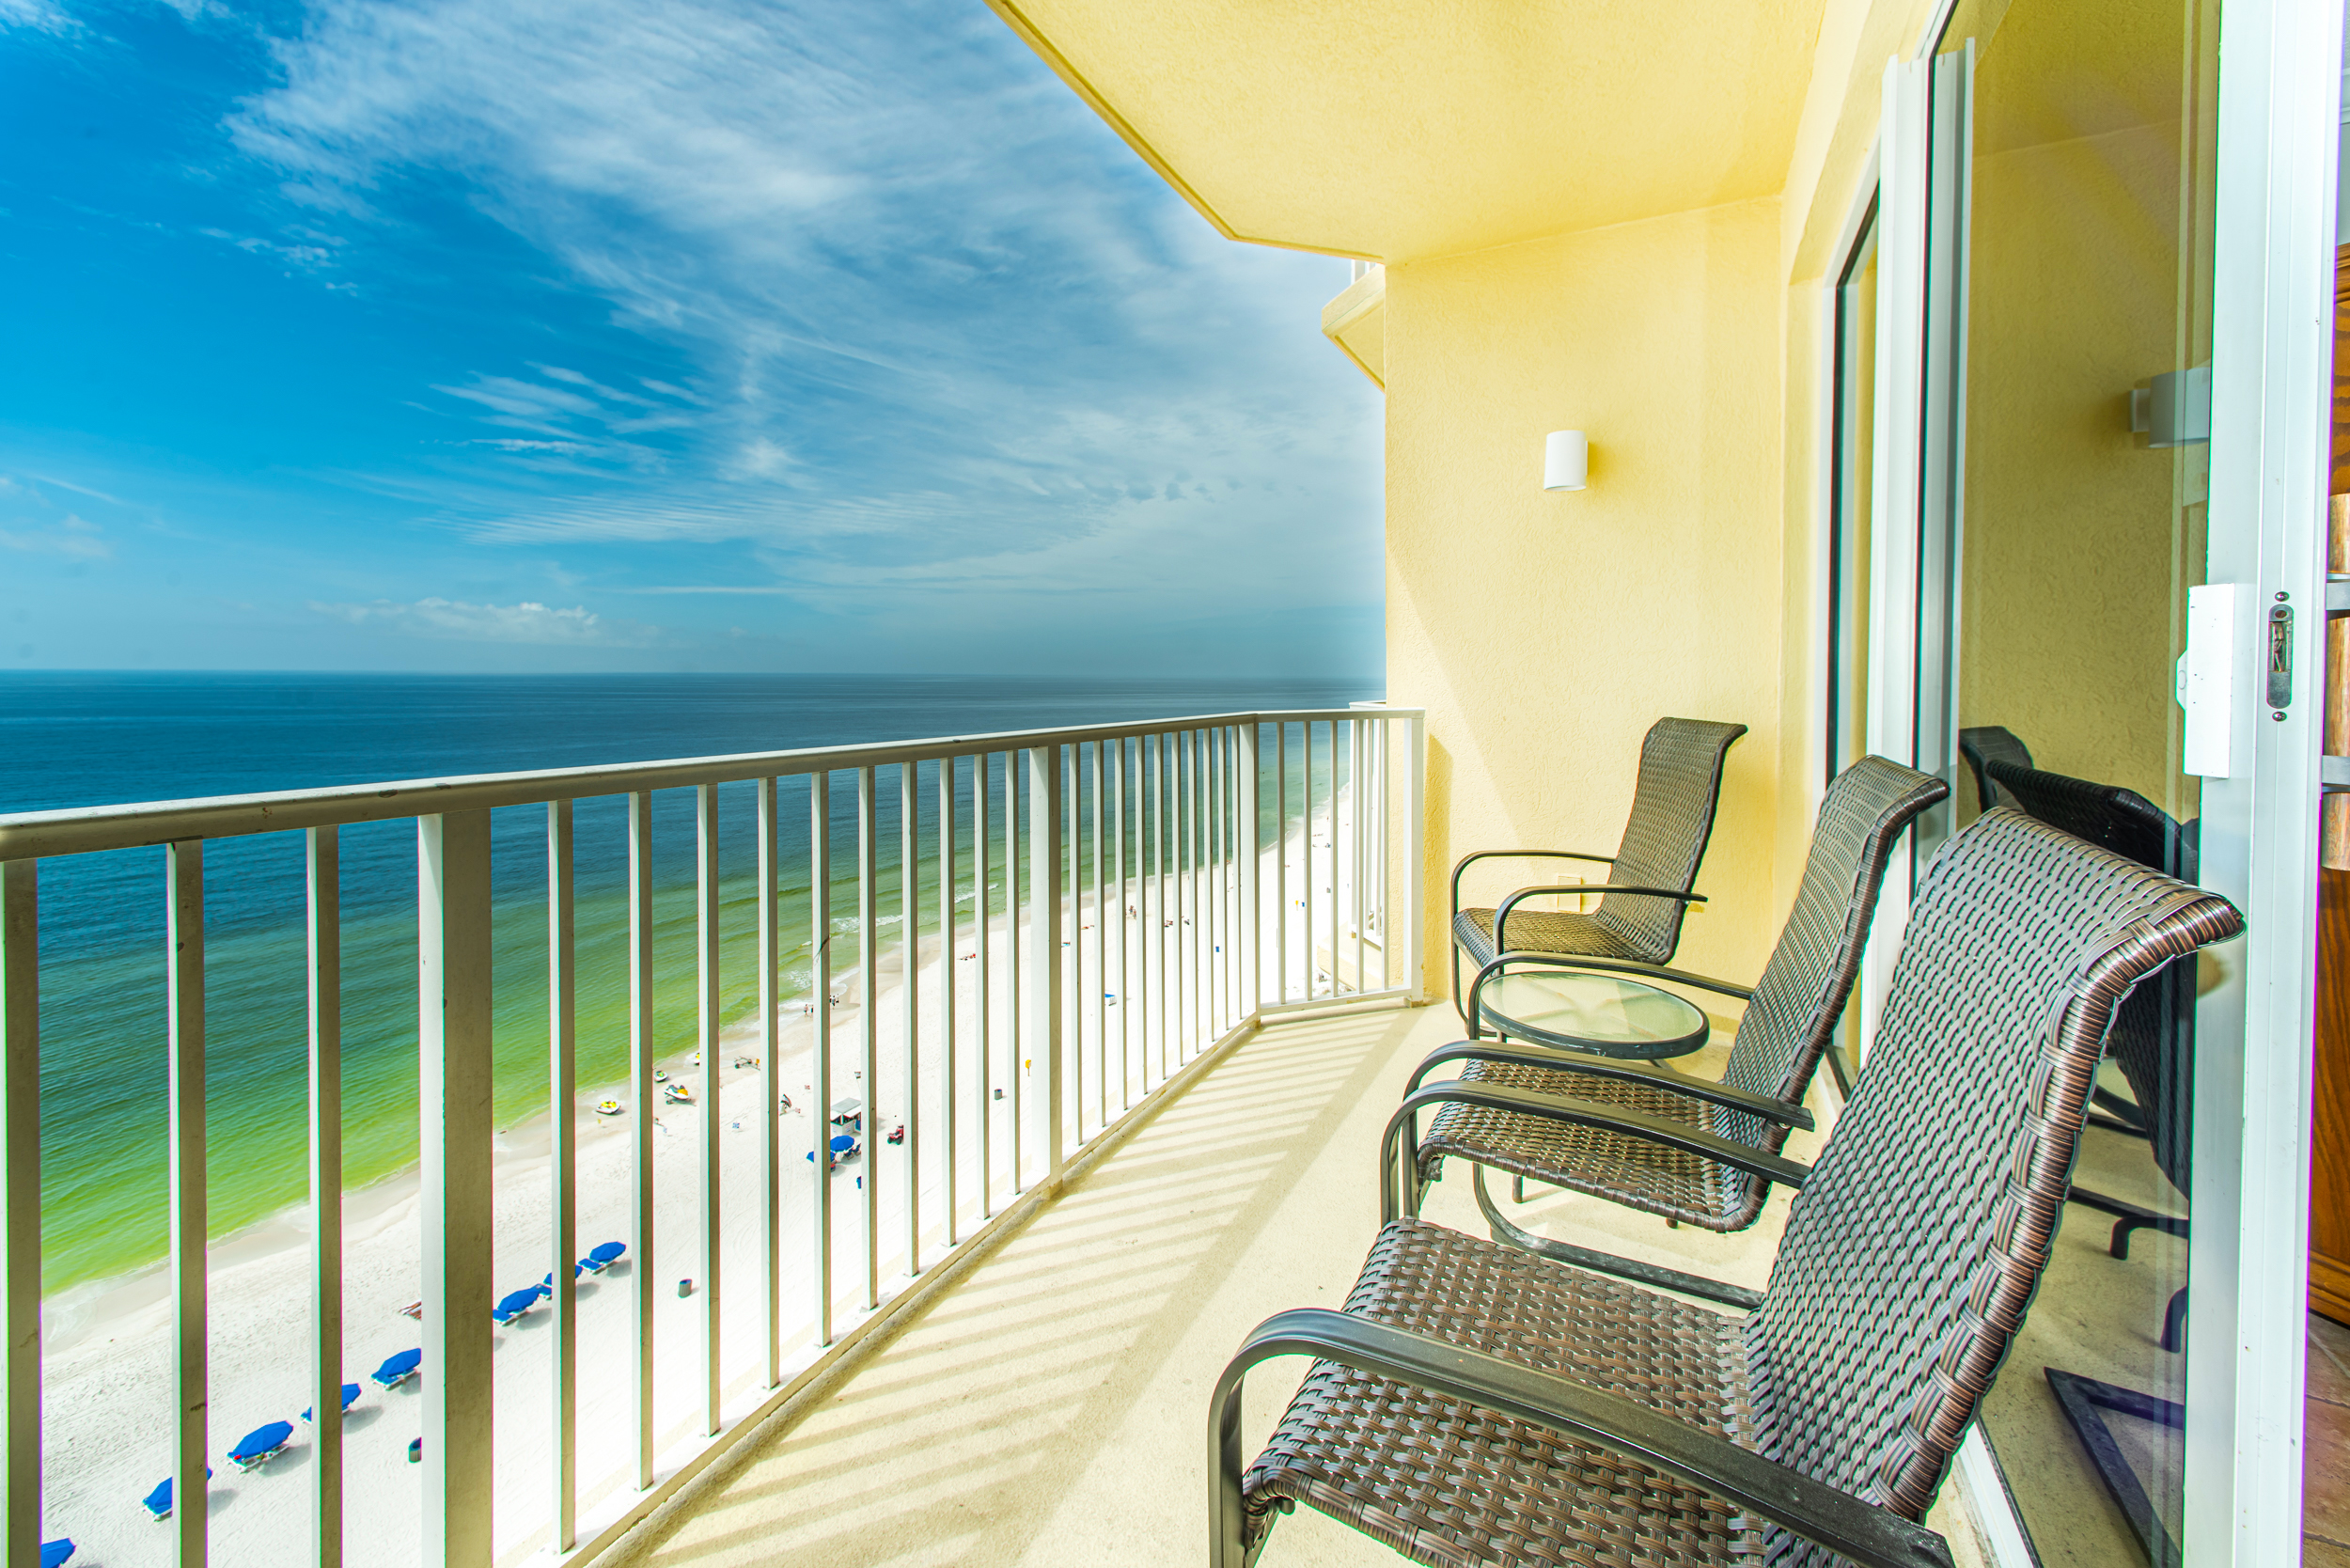 Relax and enjoy the Gulf views